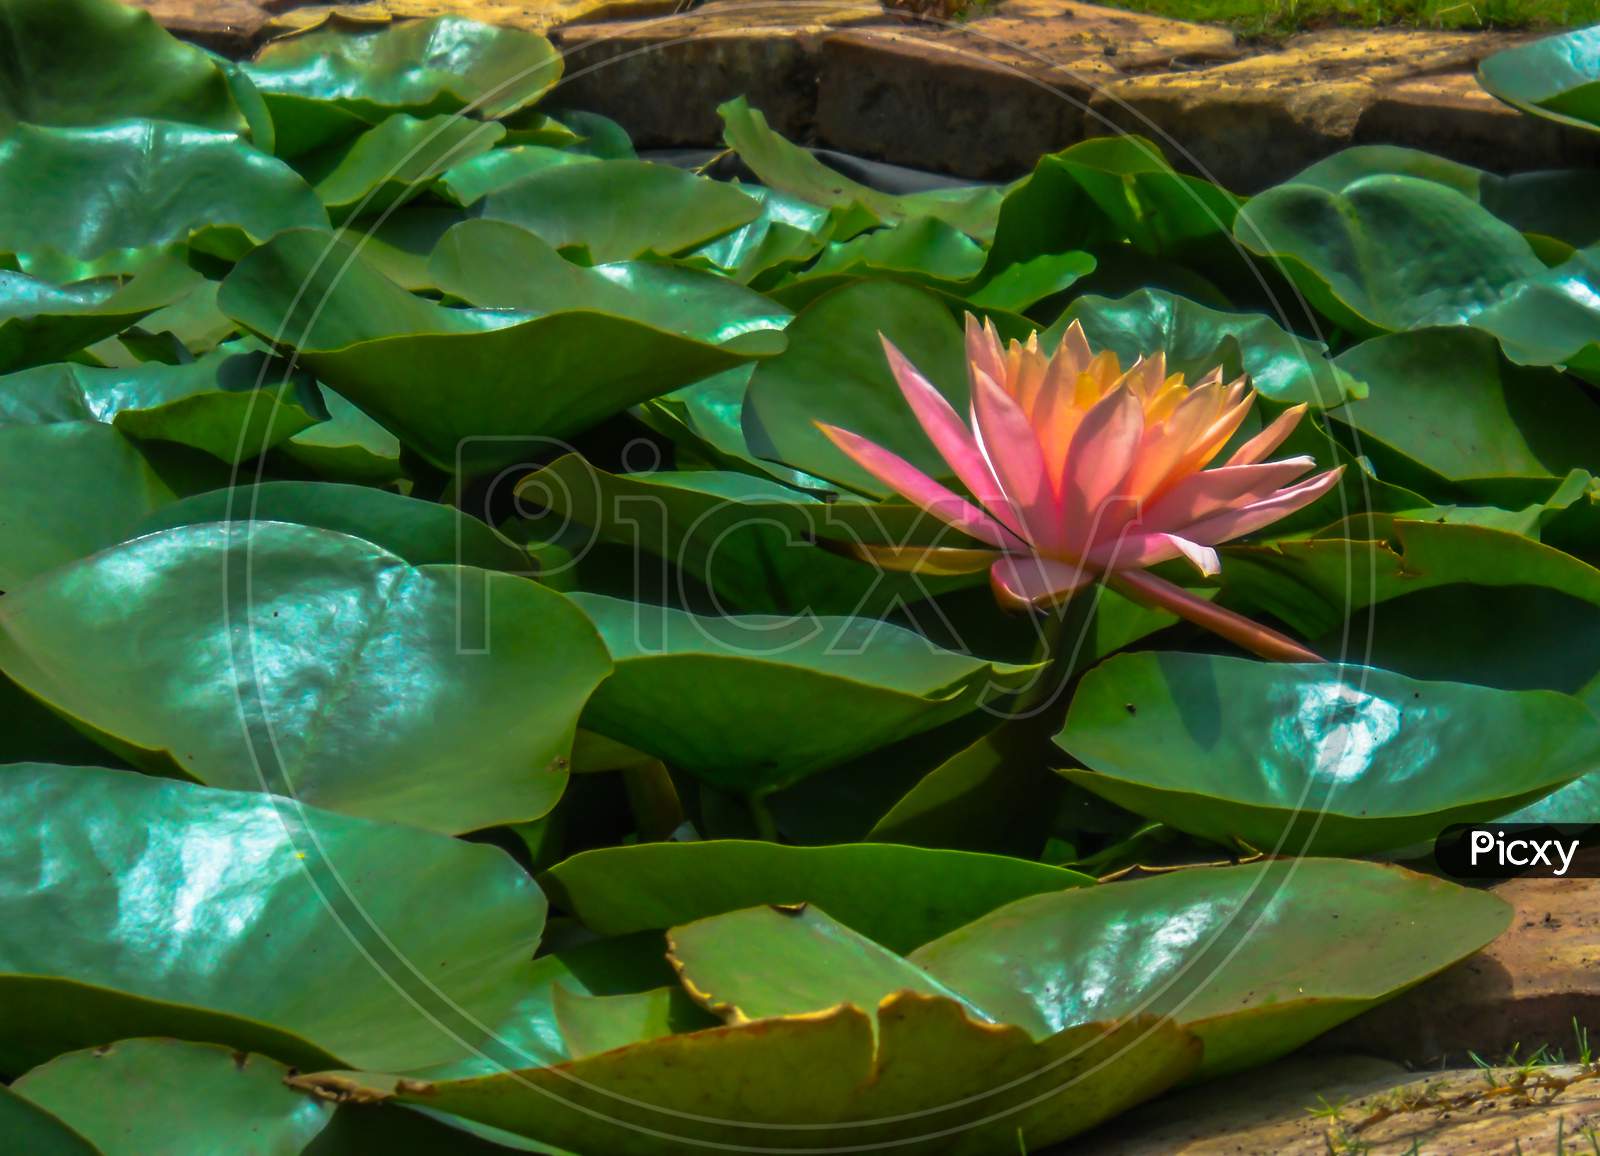 A Single Pink Lotus Flower In A Pond Surrounded By The Green Leaves.